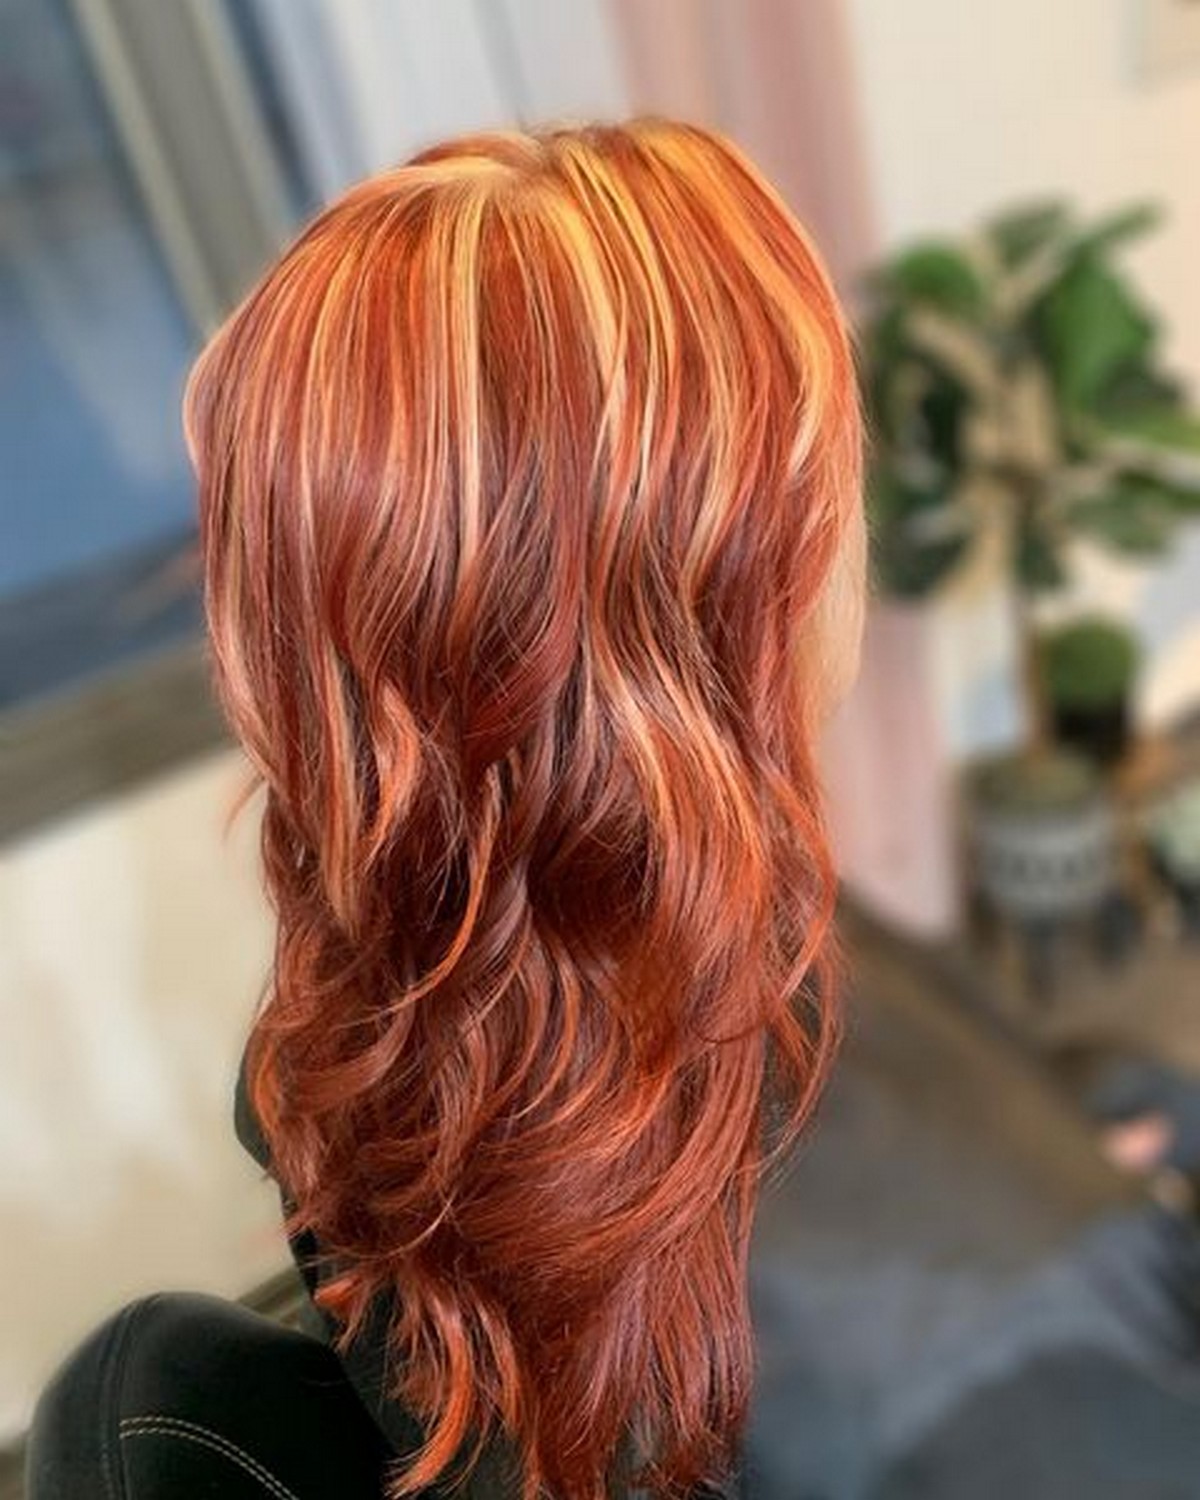 Red And Blonde Highlights With Layered